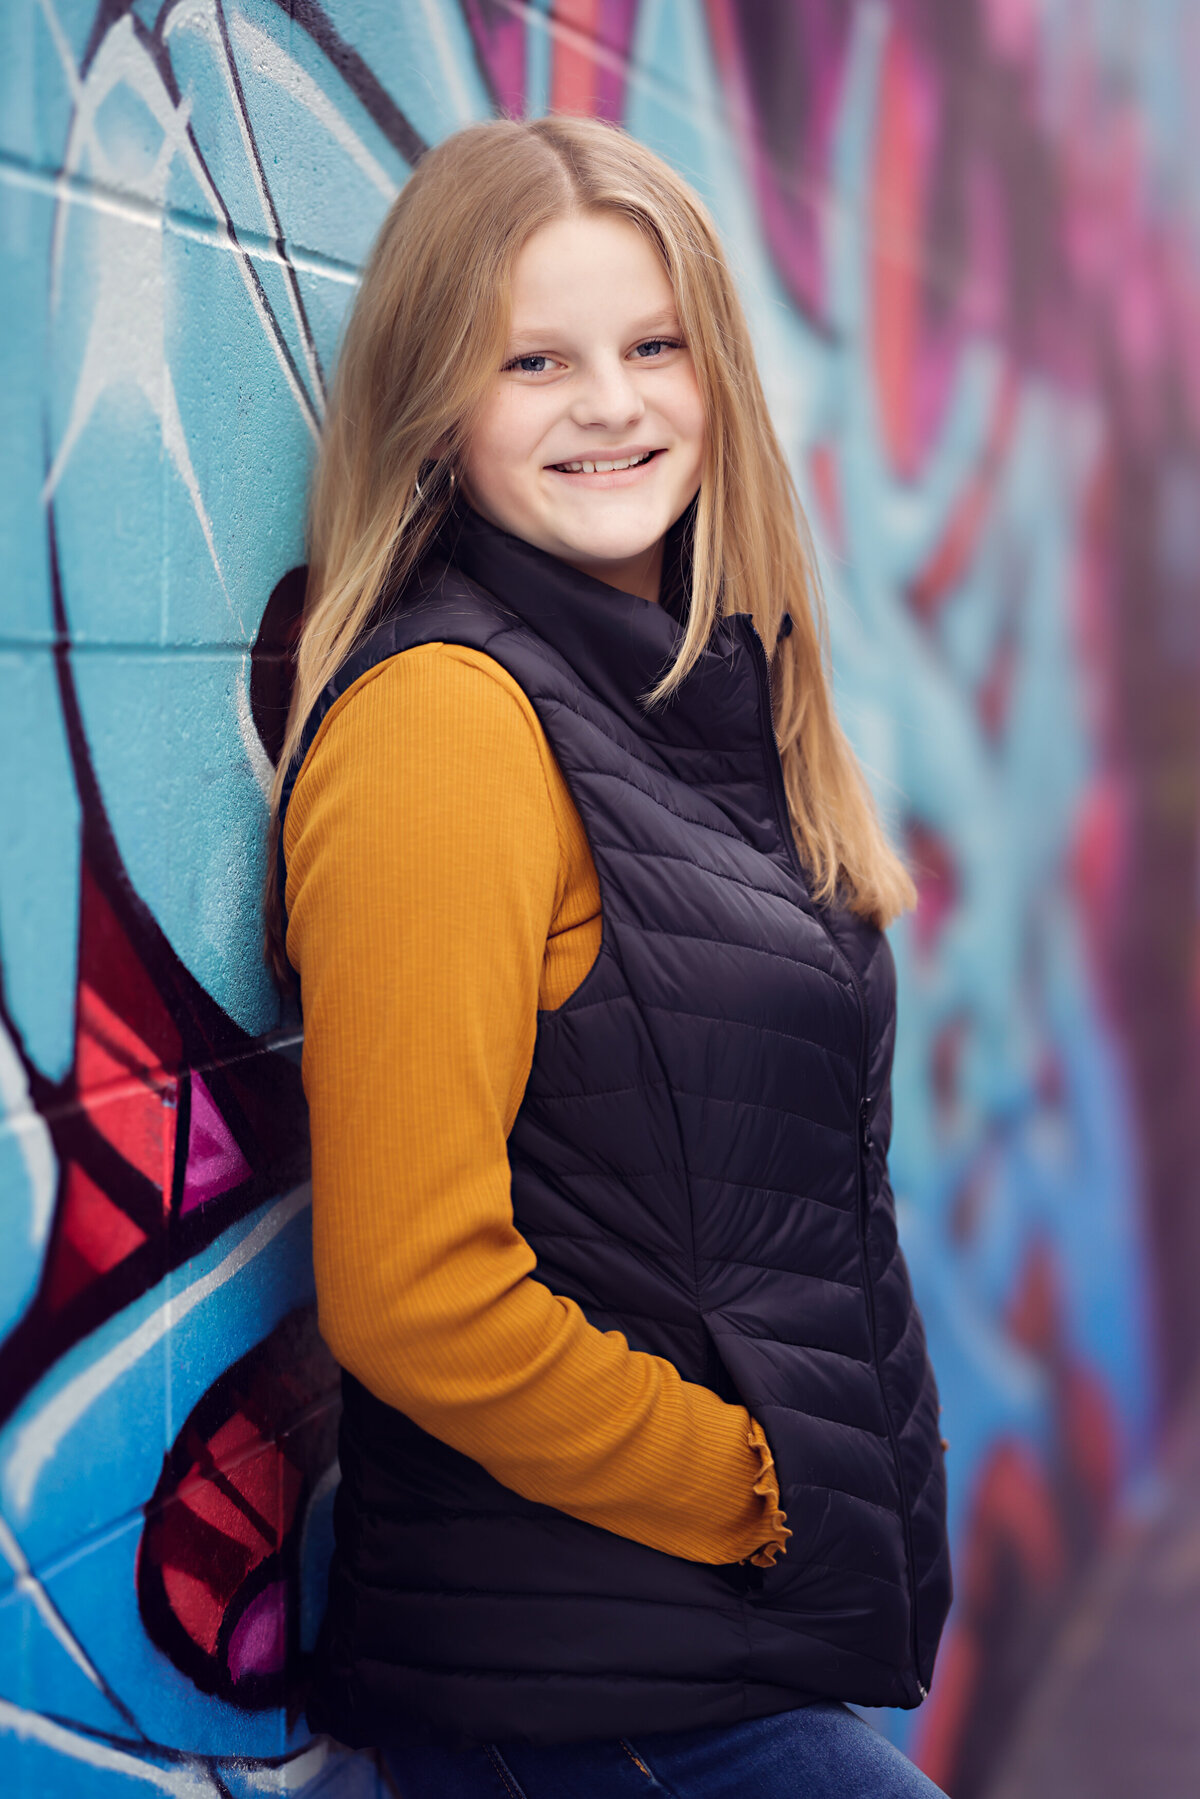 Yvonne-Min-Family-Photos-outside-natural-light-alley-graffiti-sunset-photography-paint-denver-thornton-broomfield-girl-daughter-teen-rino-art-district-portraits-session-westminster-north-colorado-golden-canon-images-camera-vest-blond-downtown-65